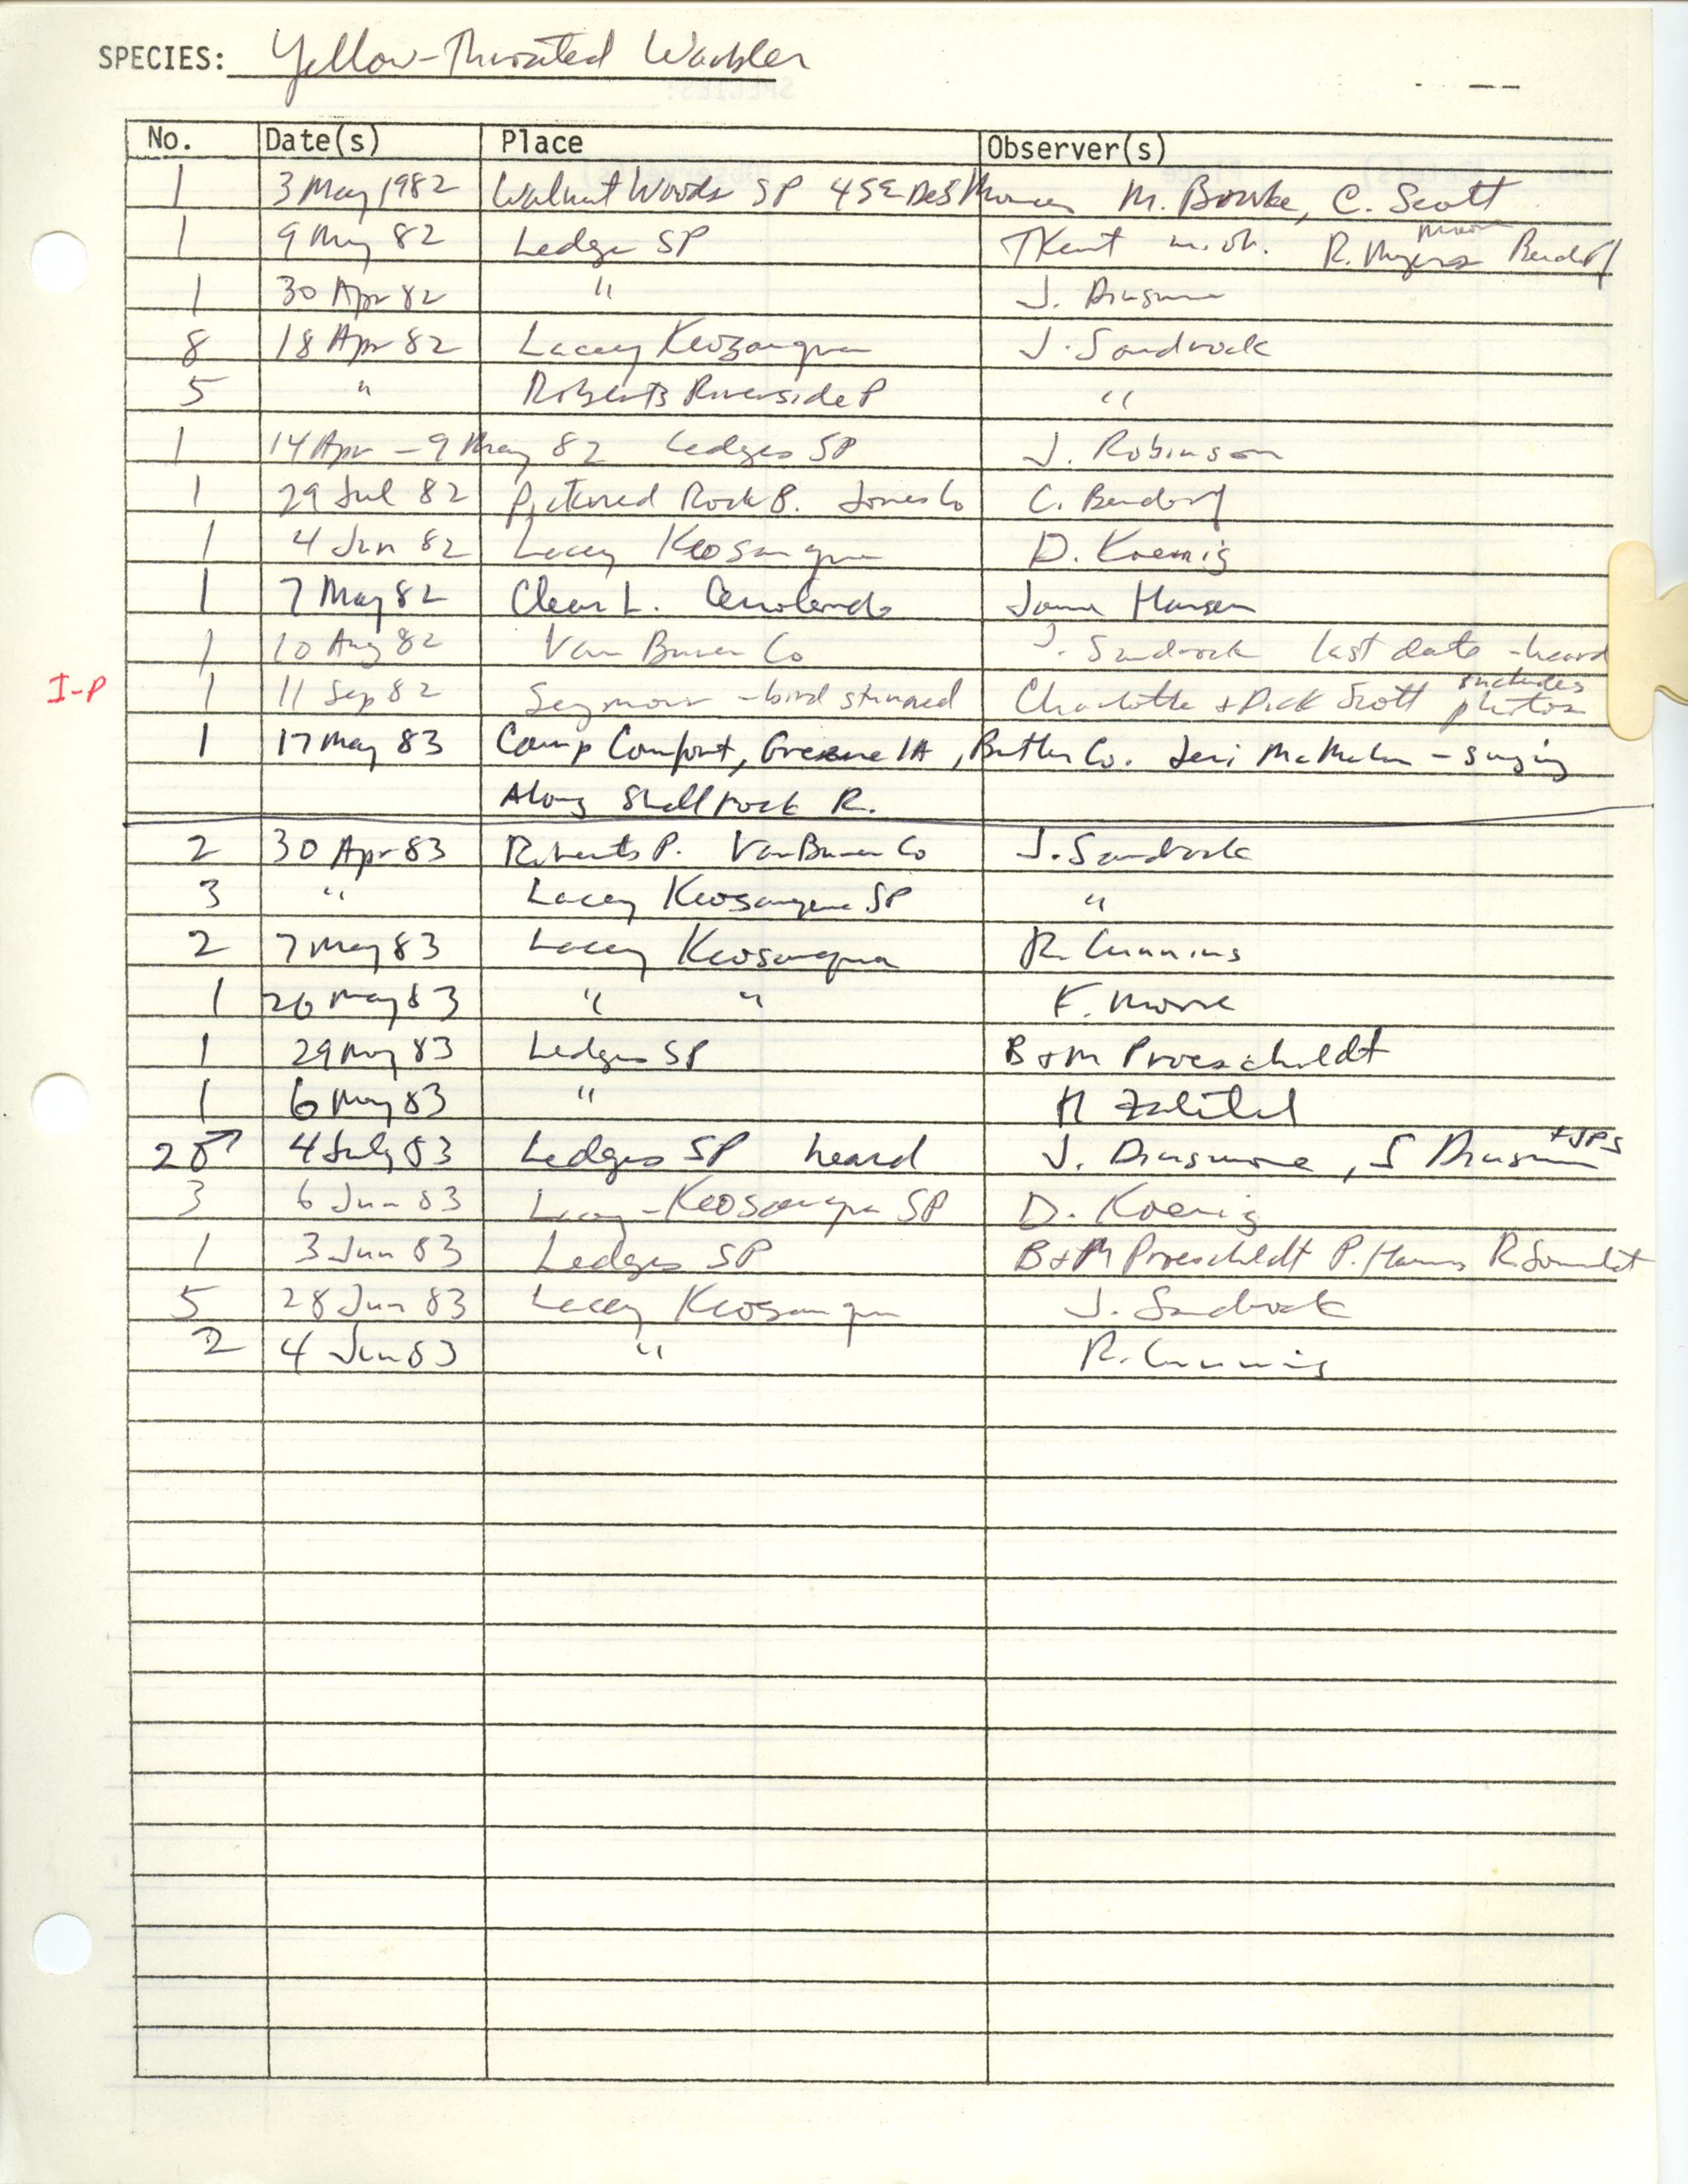 Iowa Ornithologists' Union, field report compiled data, Yellow-throated Warbler, 1982-1983